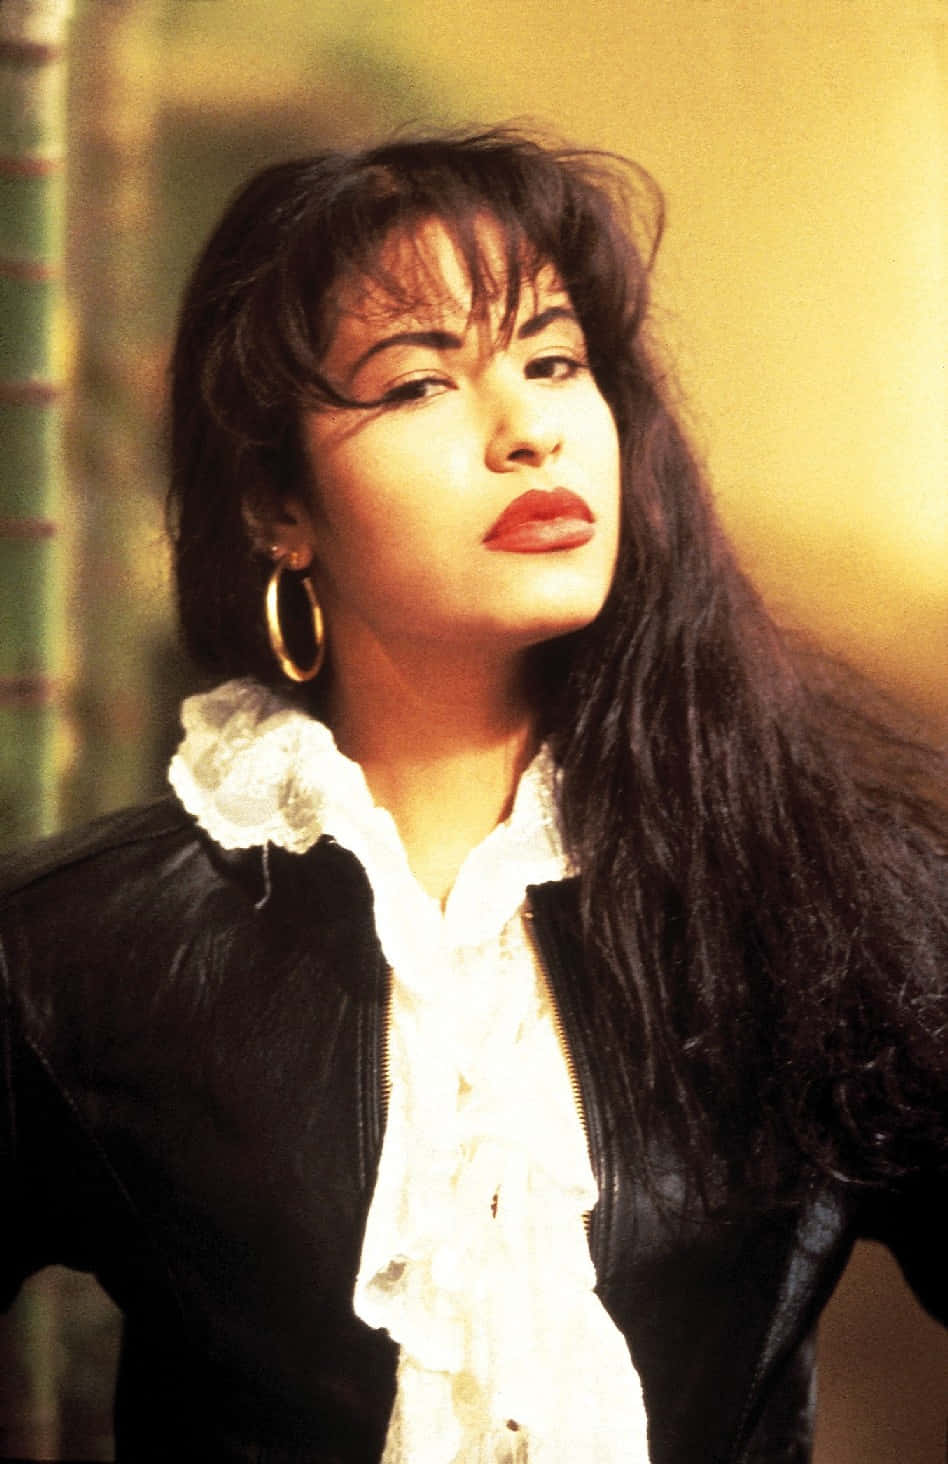 Get the iconic Selena Quintanilla's look with this iPhone wallpaper. Wallpaper